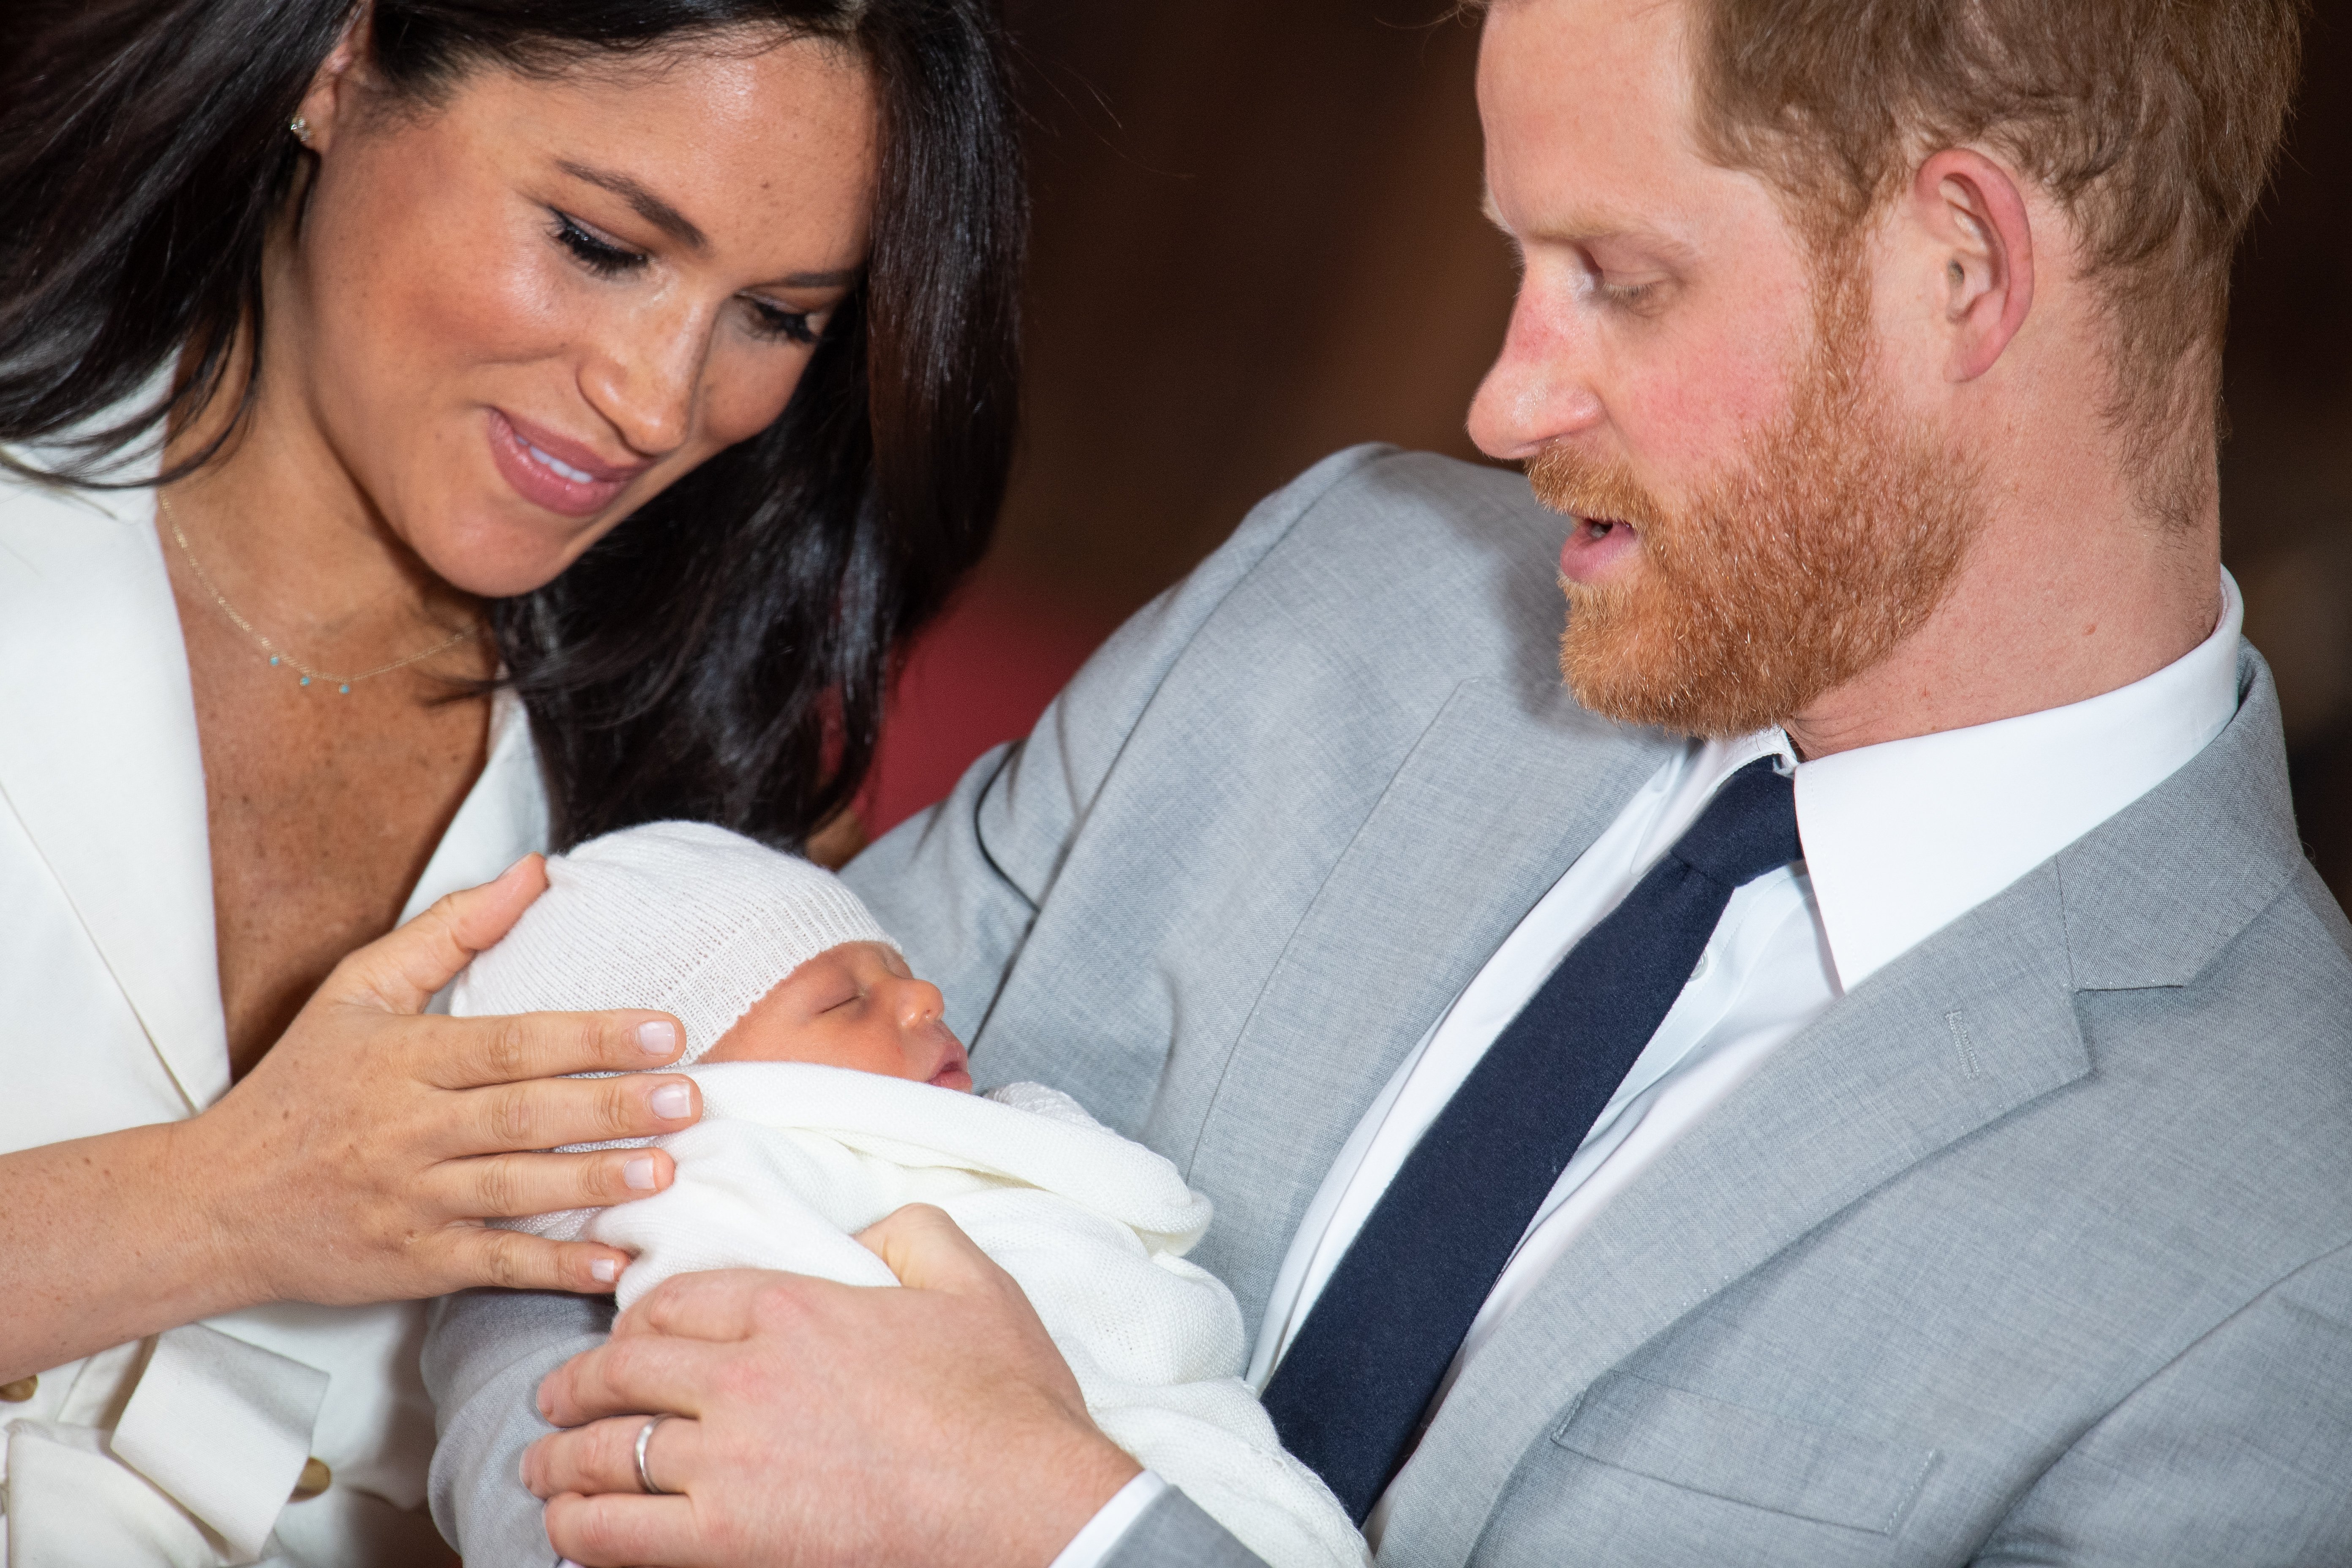 Prince Harry, Duke of Sussex and Meghan, Duchess of Sussex, pose with their newborn son Archie Harrison Mountbatten-Windsor during a photocall in St George's Hall at Windsor Castle on May 8, 2019 in Windsor, England. | Source: Getty Images